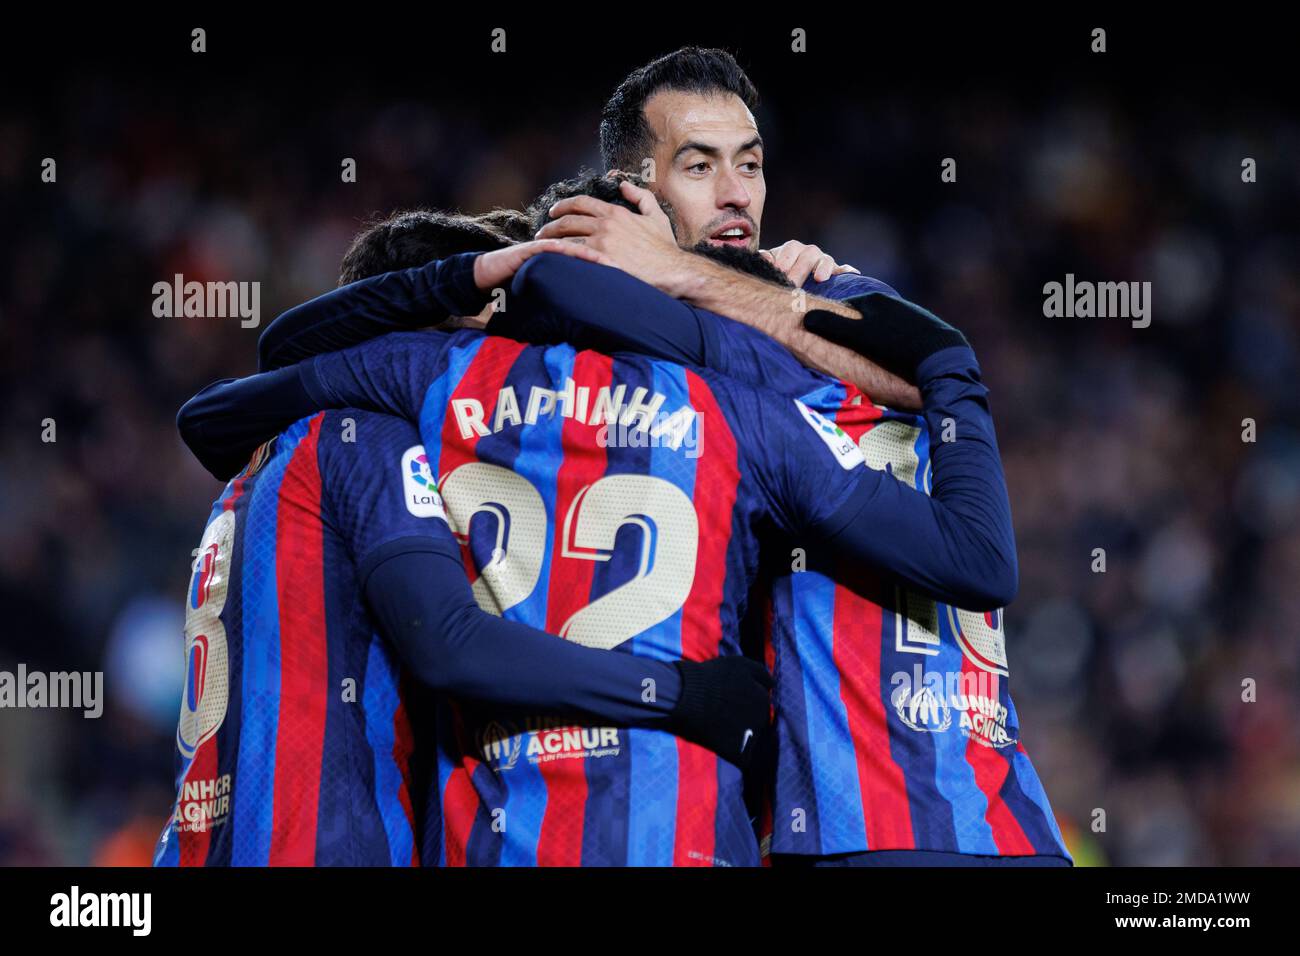 Barcelona, Spain. 22th Jan, 2023. Barcelona players celebrate a goal during the LaLiga match between FC Barcelona and Getafe CF at the Spotify Camp Nou Stadium in Barcelona, Spain. Credit: Christian Bertrand/Alamy Live News Stock Photo